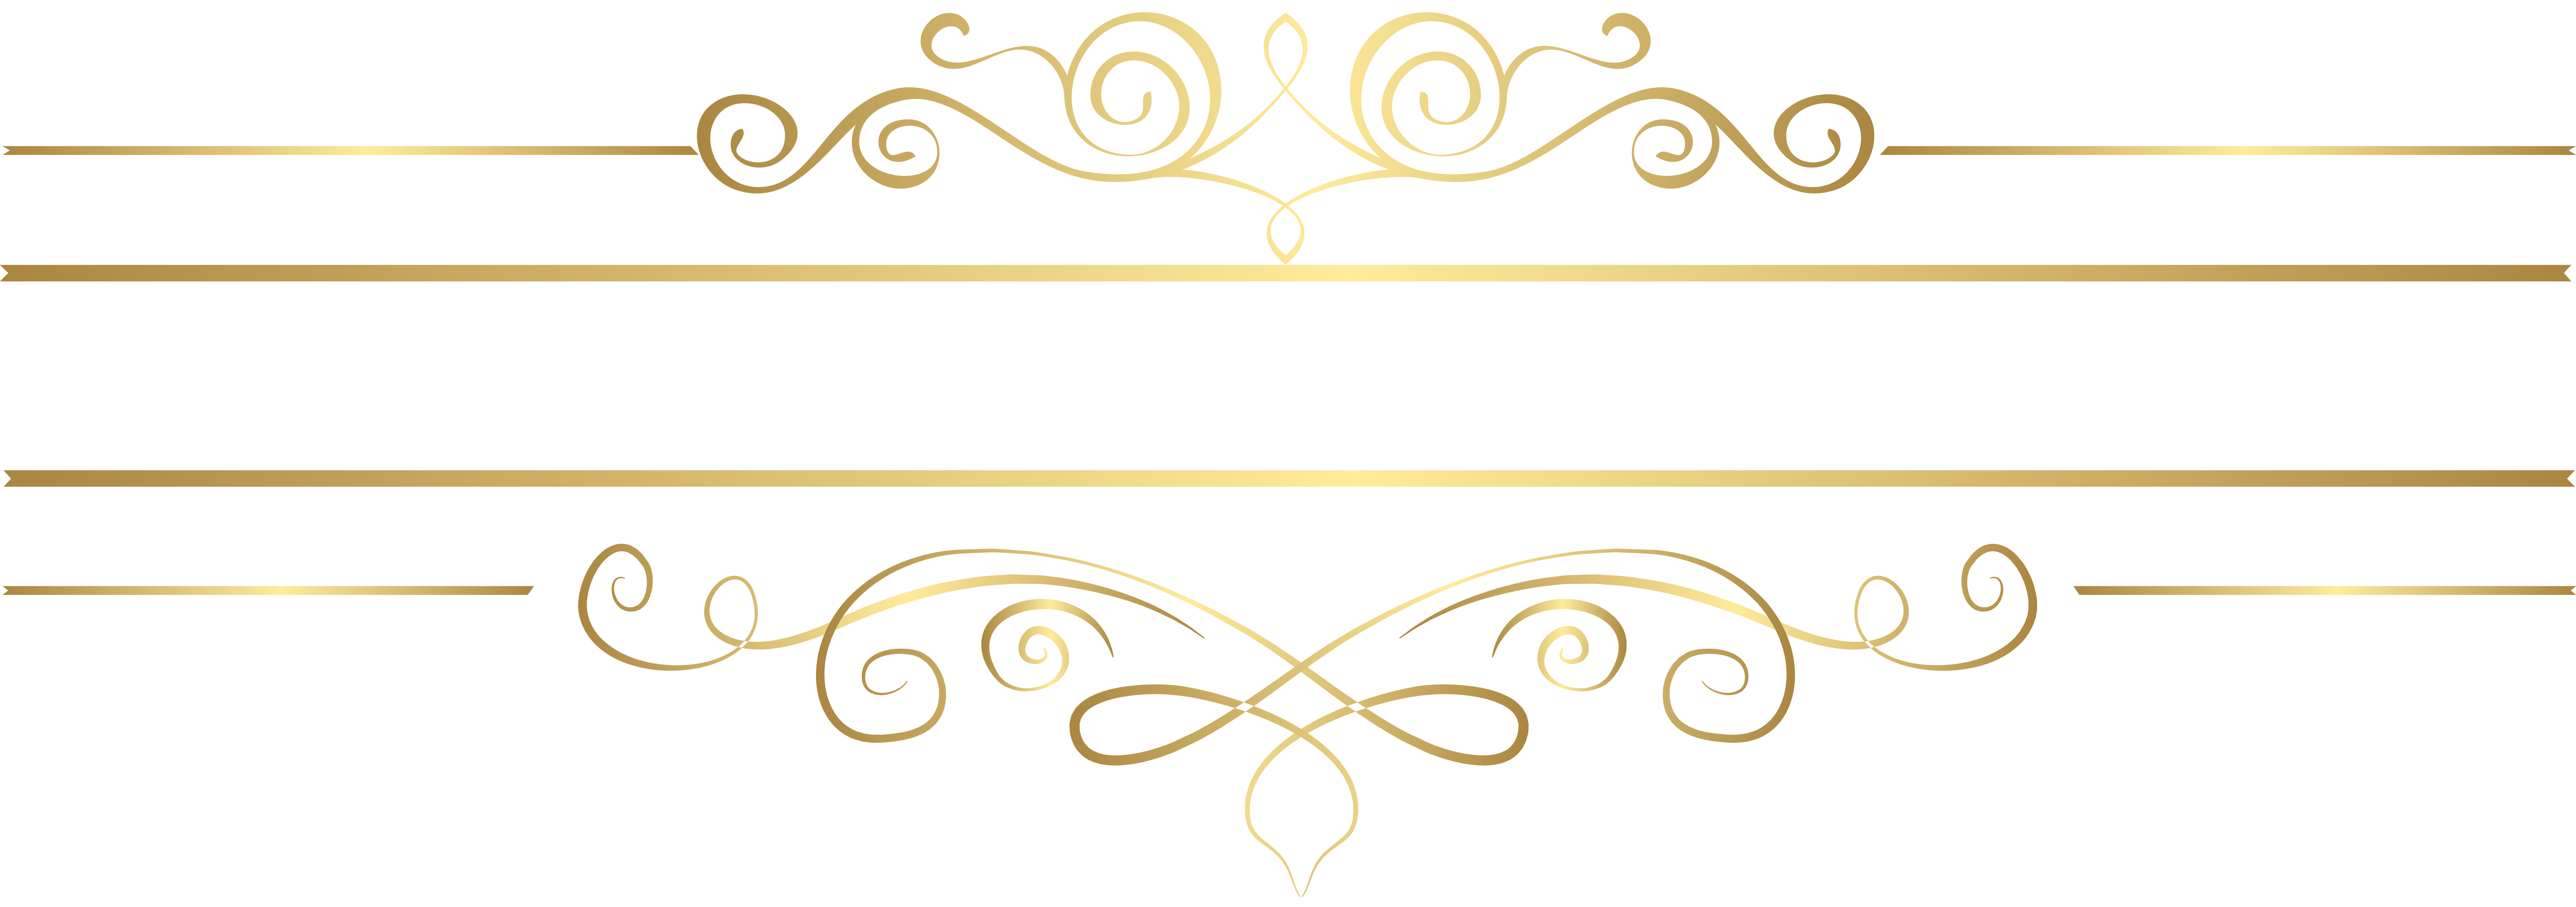 Free Decorative Element Cliparts Download Free Clip Art Free Clip Art On Clipart Library